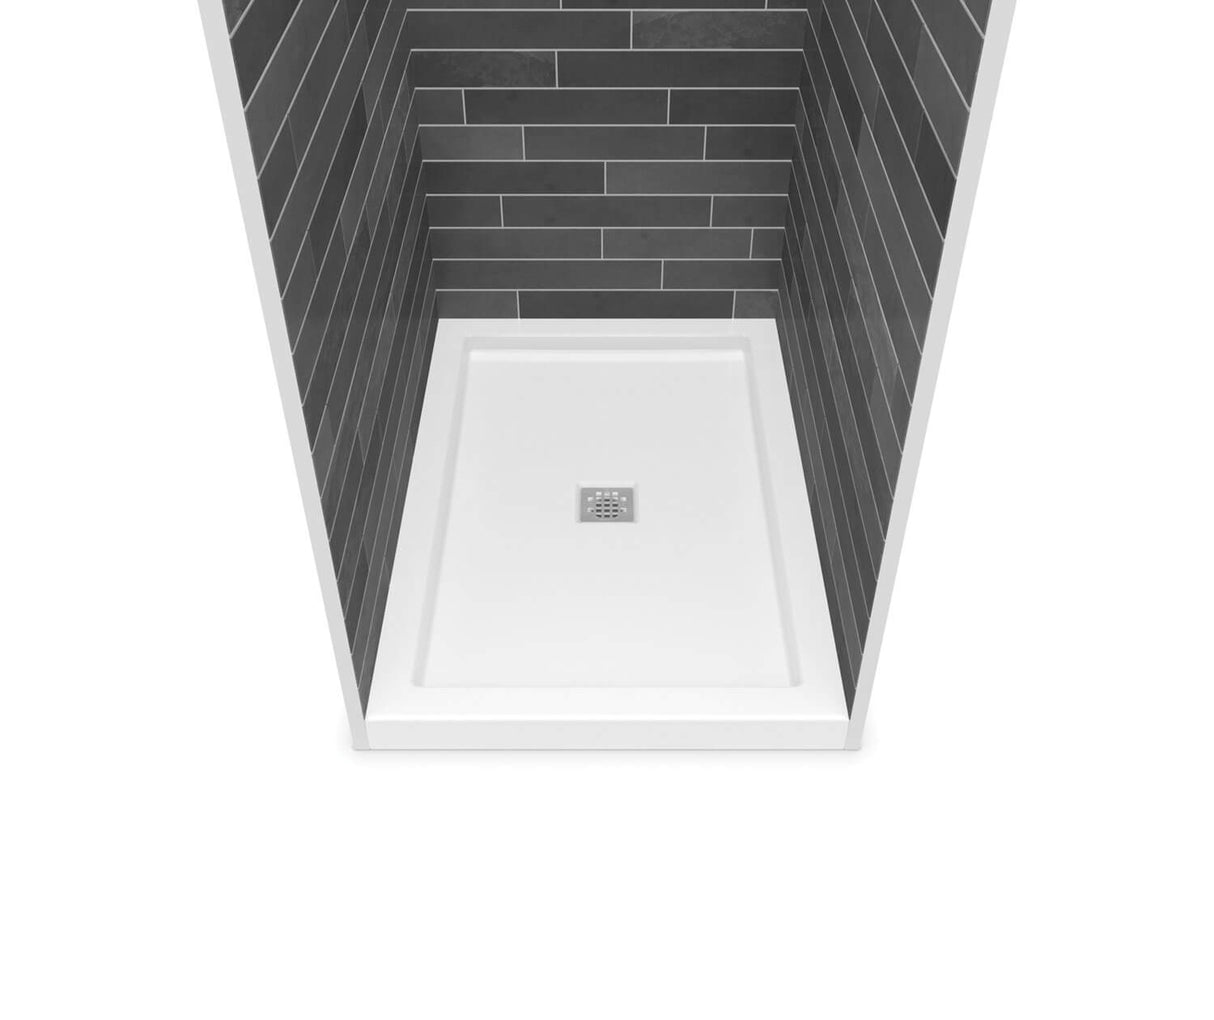 MAAX 420002-504-001-100 B3Square 4834 Acrylic Alcove Deep Shower Base in White with Center Drain